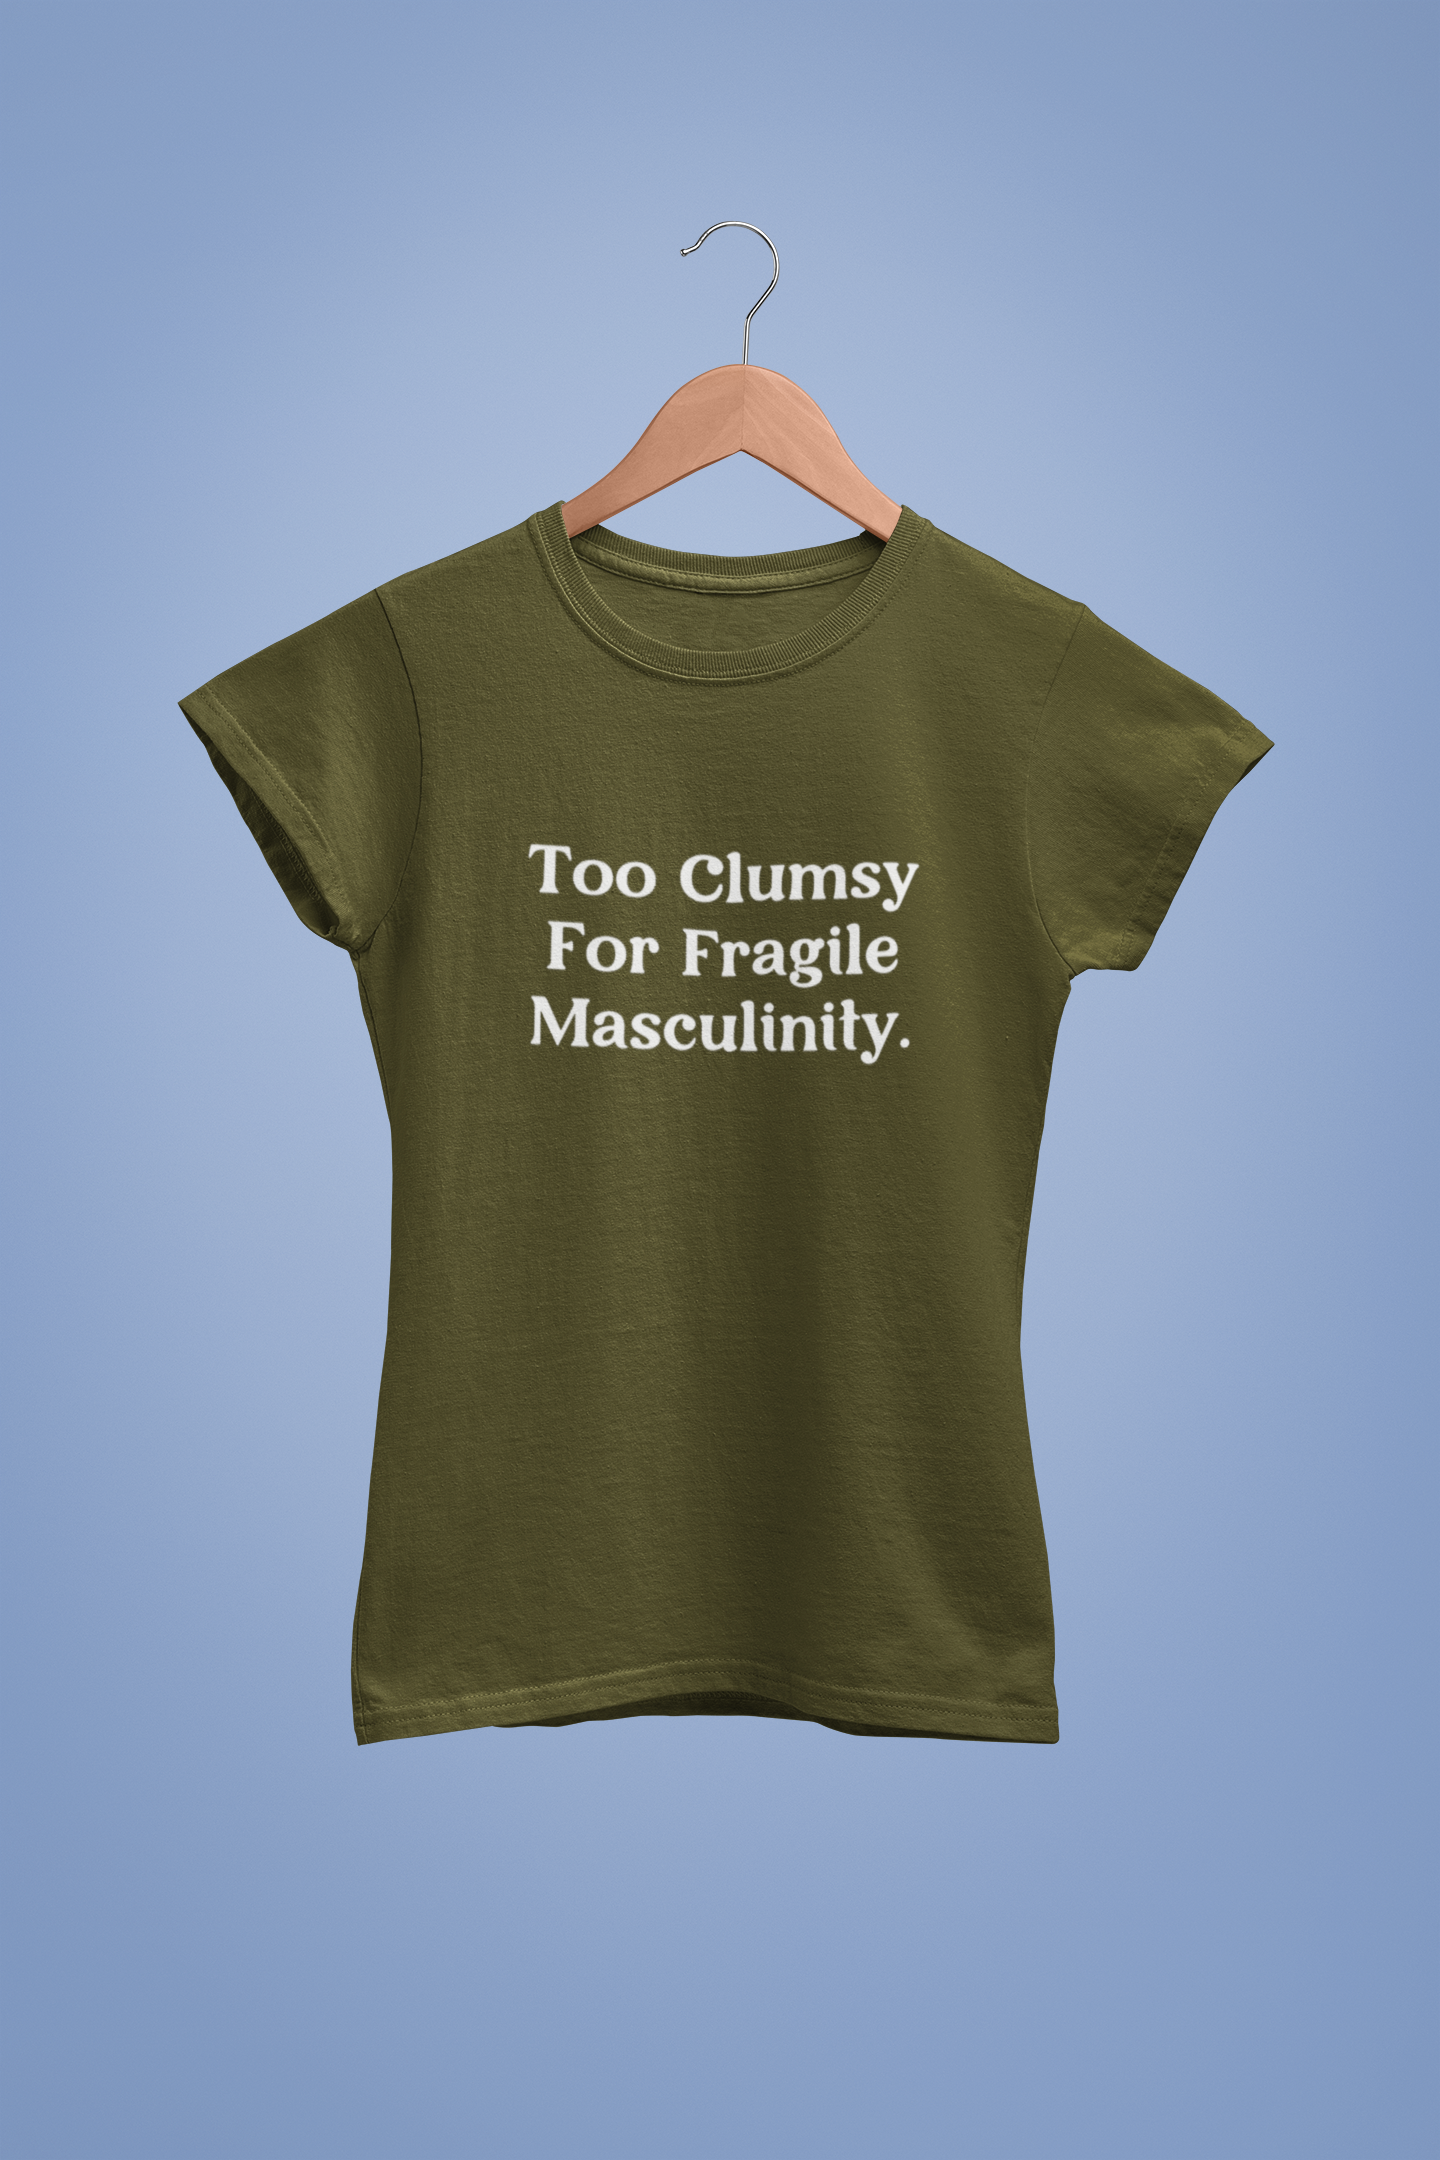 Too clumsy | Feminist | T-shirt